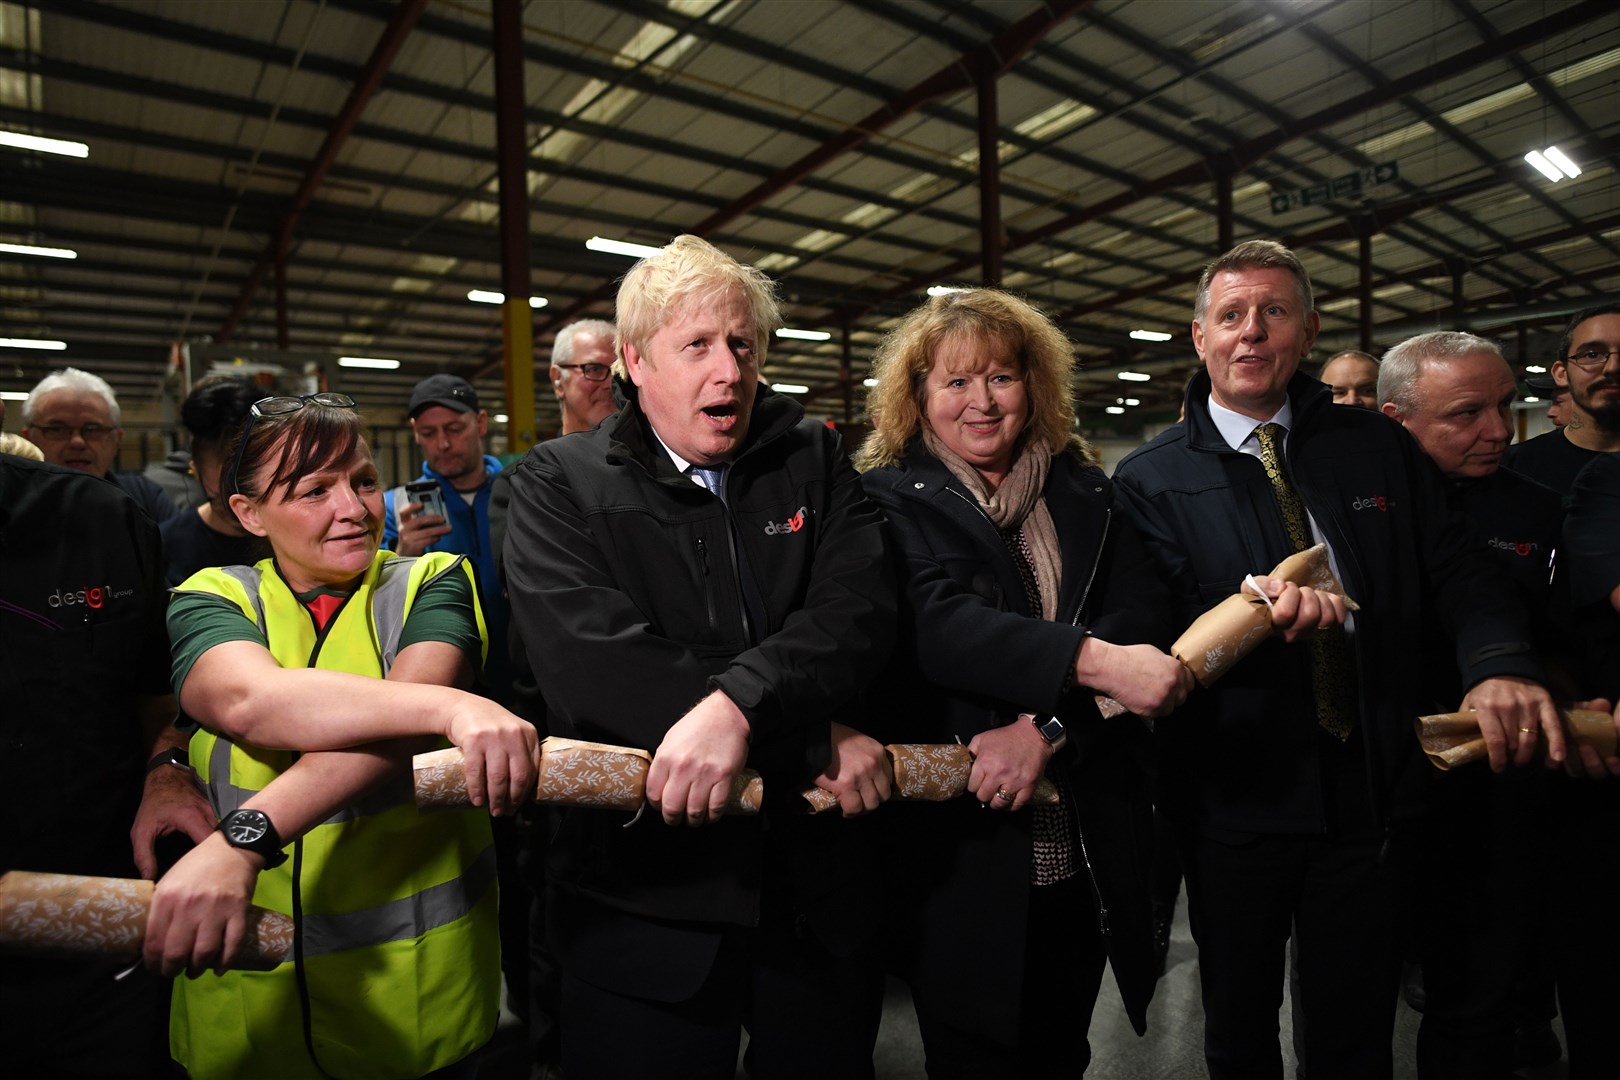 Prime Minister Boris Johnson pulls Christmas crackers with staff during a visit to IG Design Group in Hengoed in 2019 (Stefan Rousseau/PA)